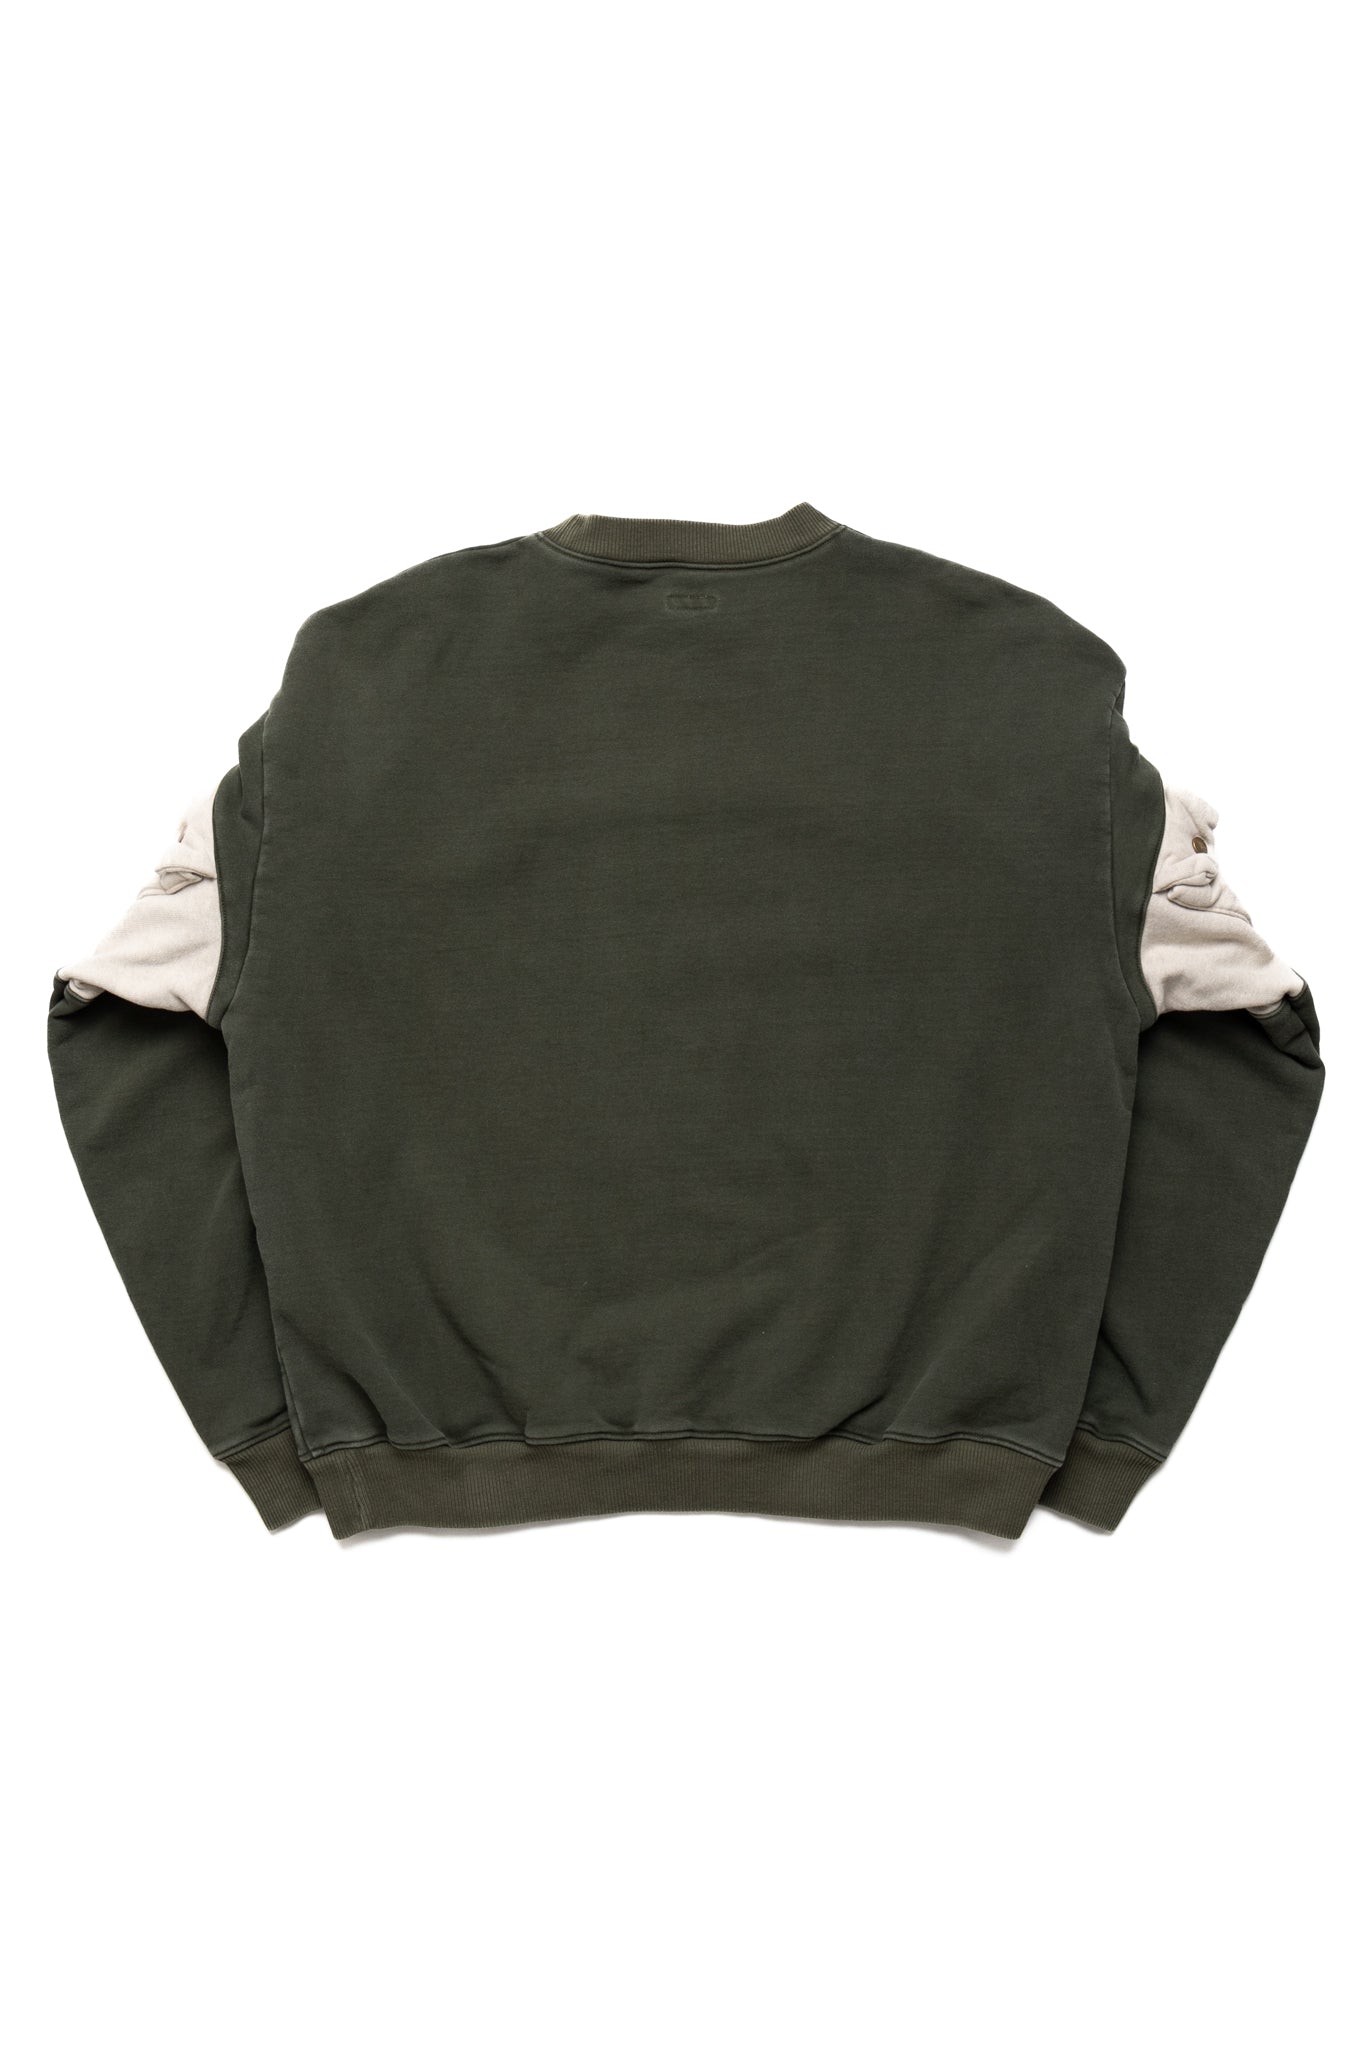 SWT Knit 2TONES NICKEL "8" Sleeve SWT (WORKING Embroidery) - Khaki